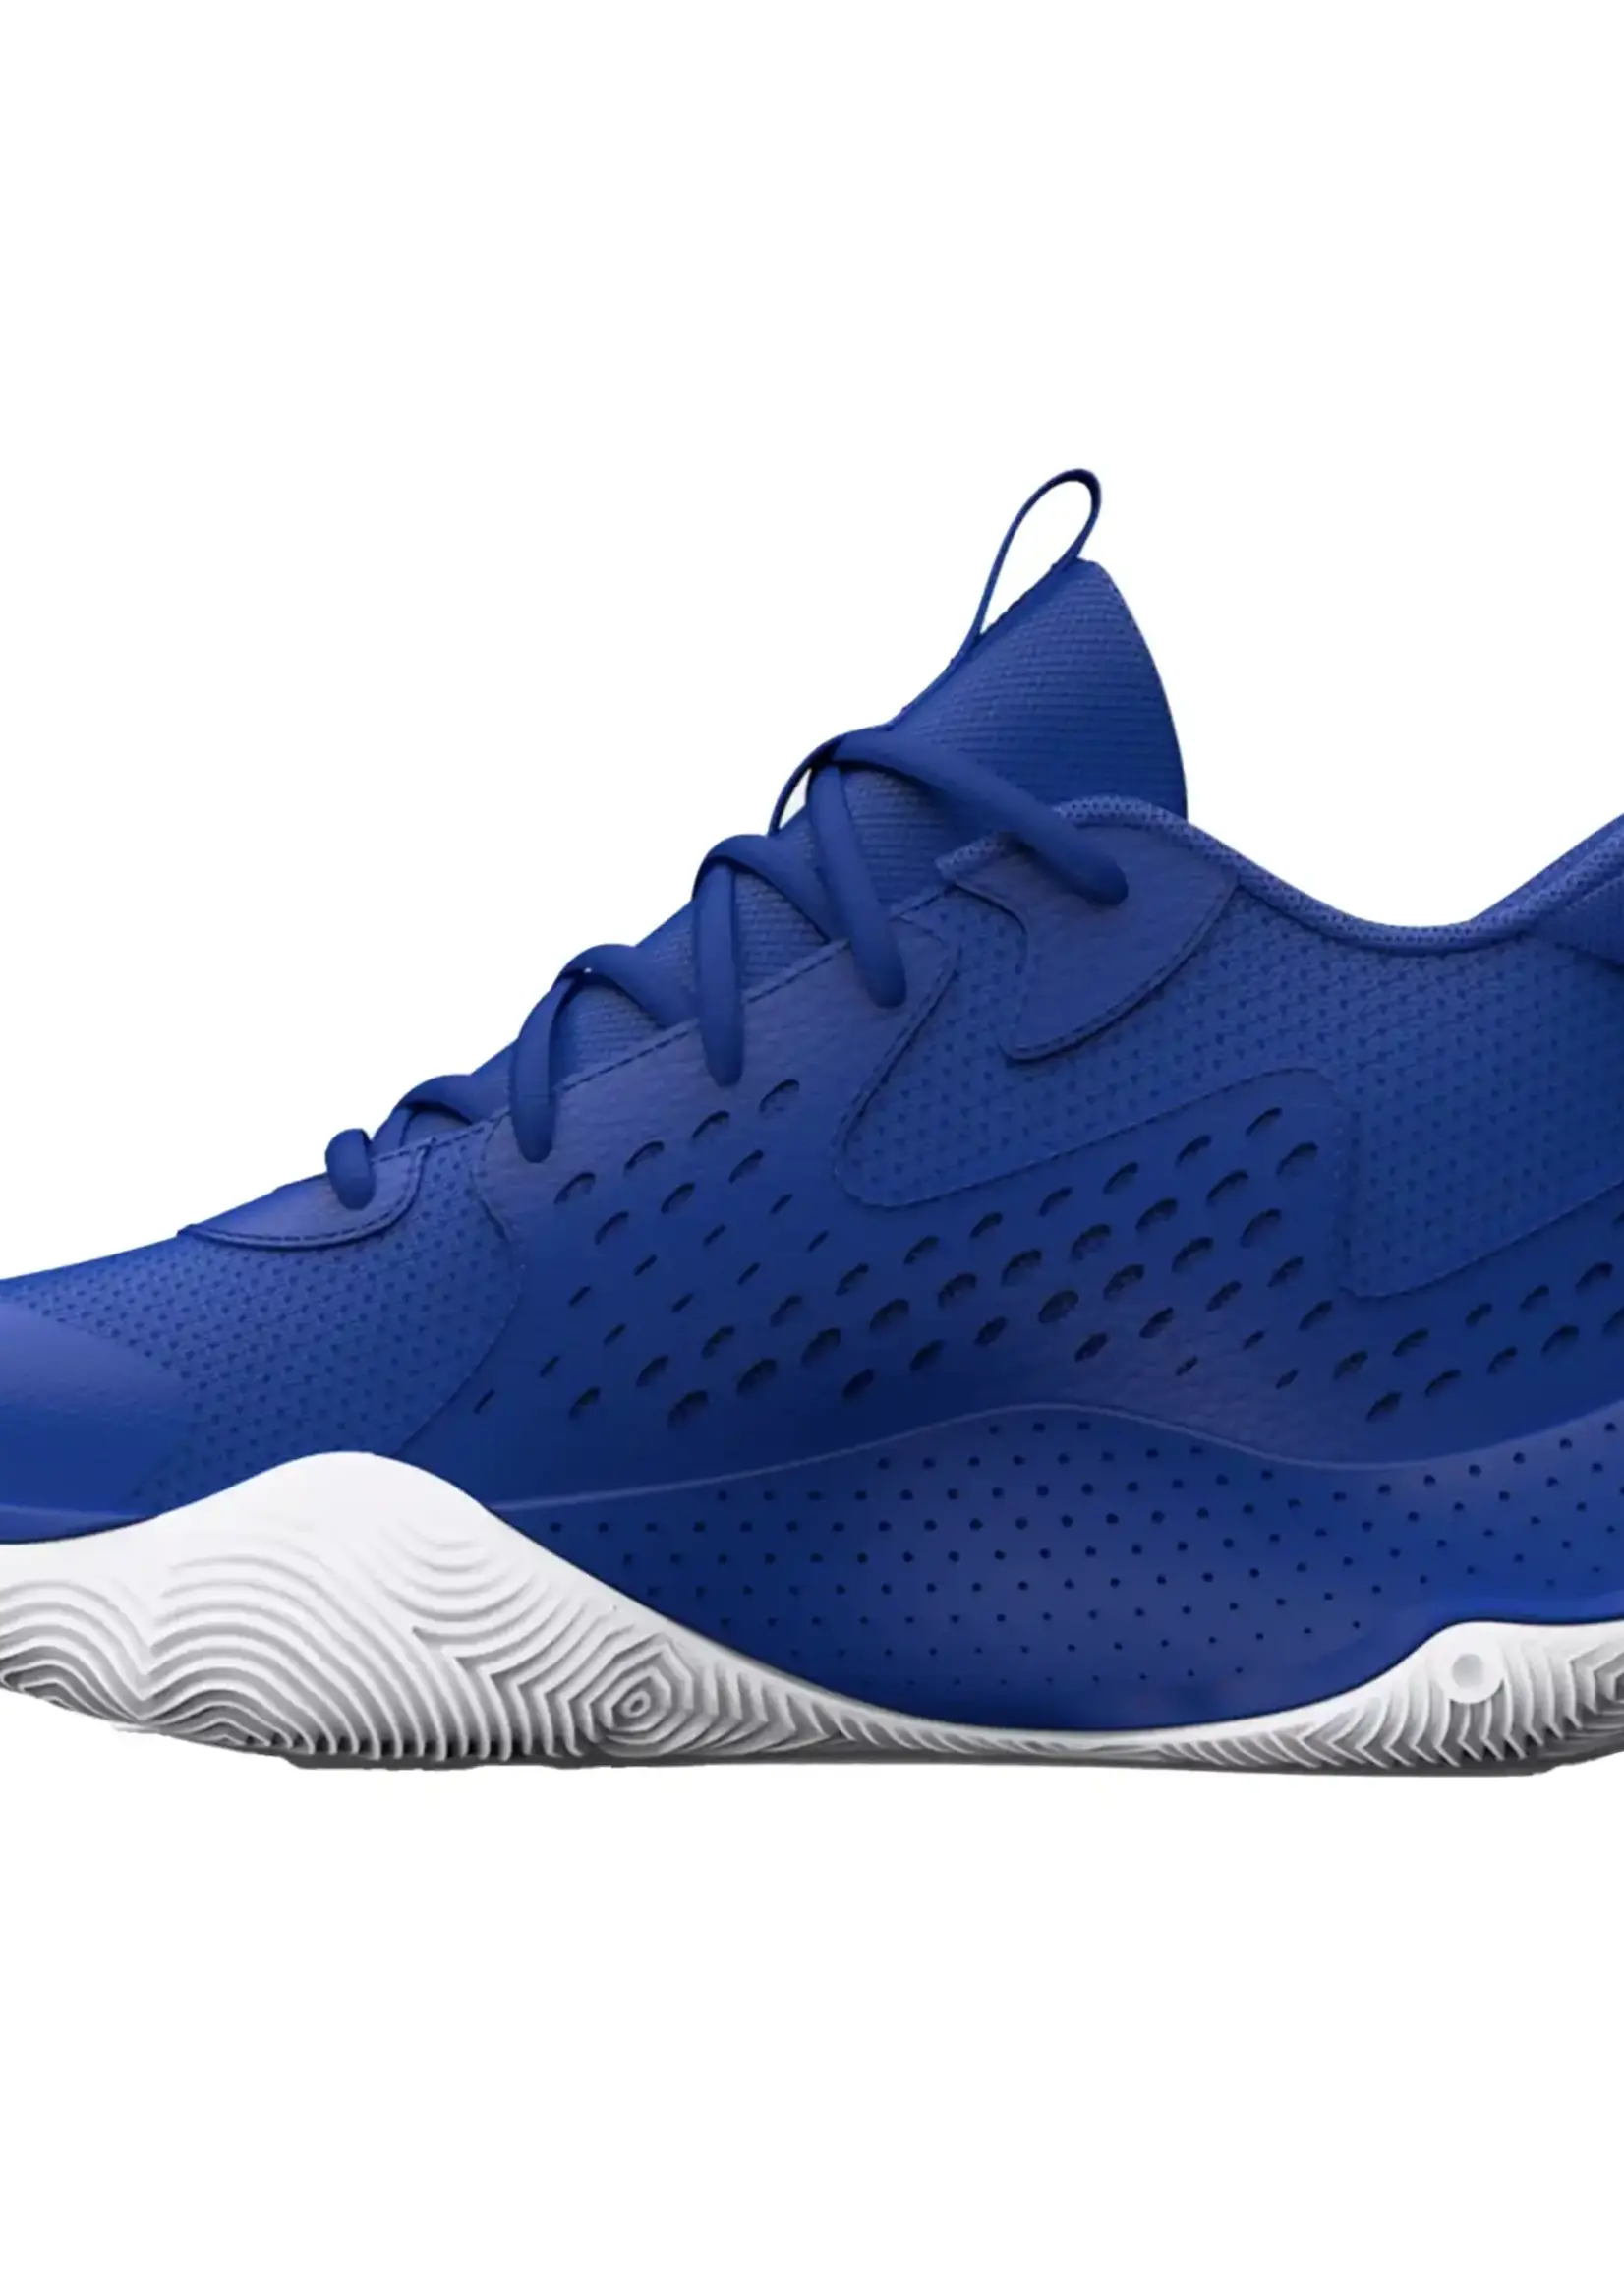 Under Armour GS JET '23 Blue Sneakers